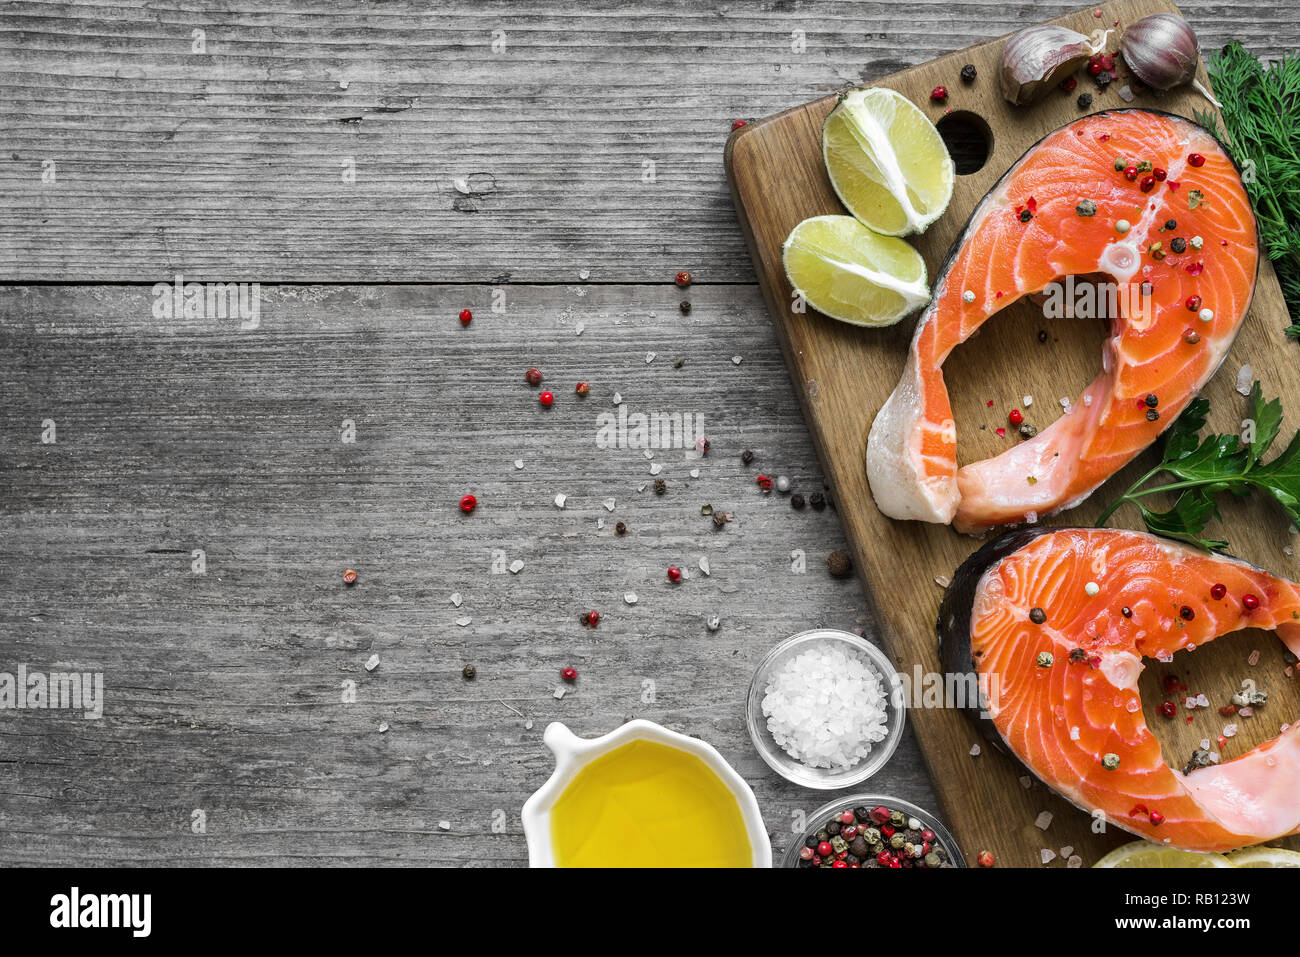 salmon steak rich in omega 3 oil with herbs and spices on wooden cutting board over rustic wooden background. Healthy and diet food. top view with cop Stock Photo